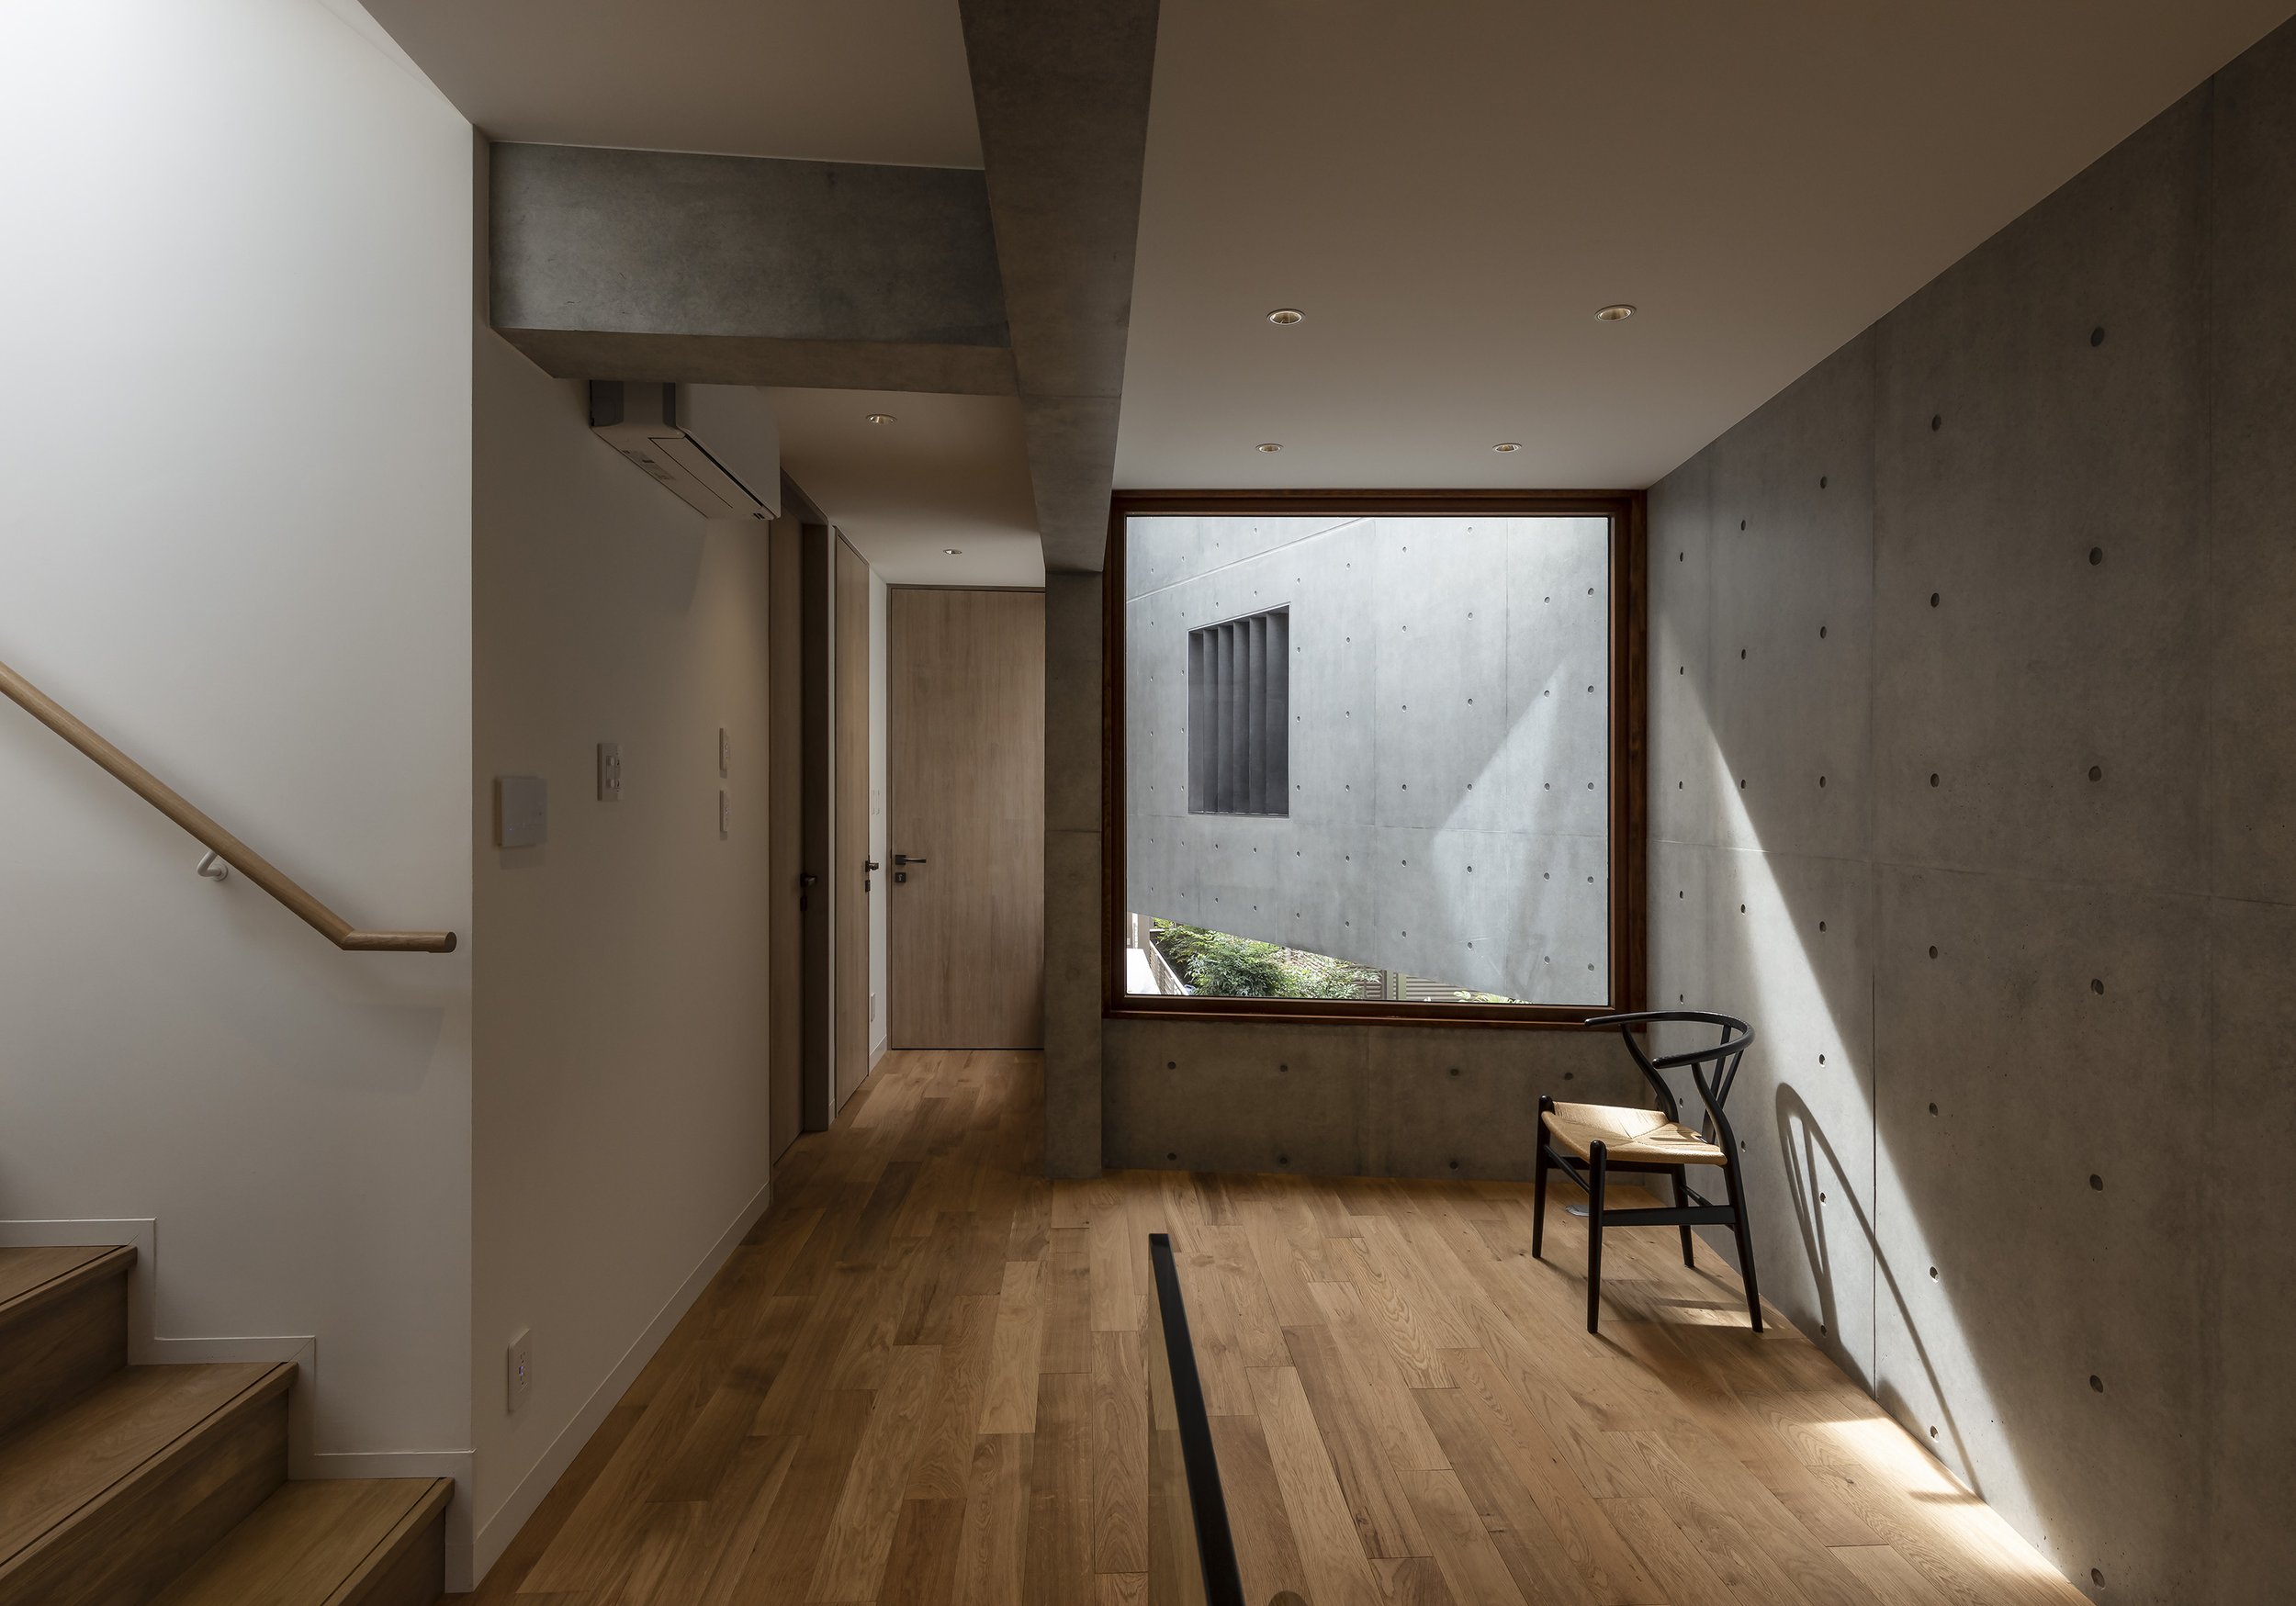 AIA JAPAN AWARD for Small Architecture 2022